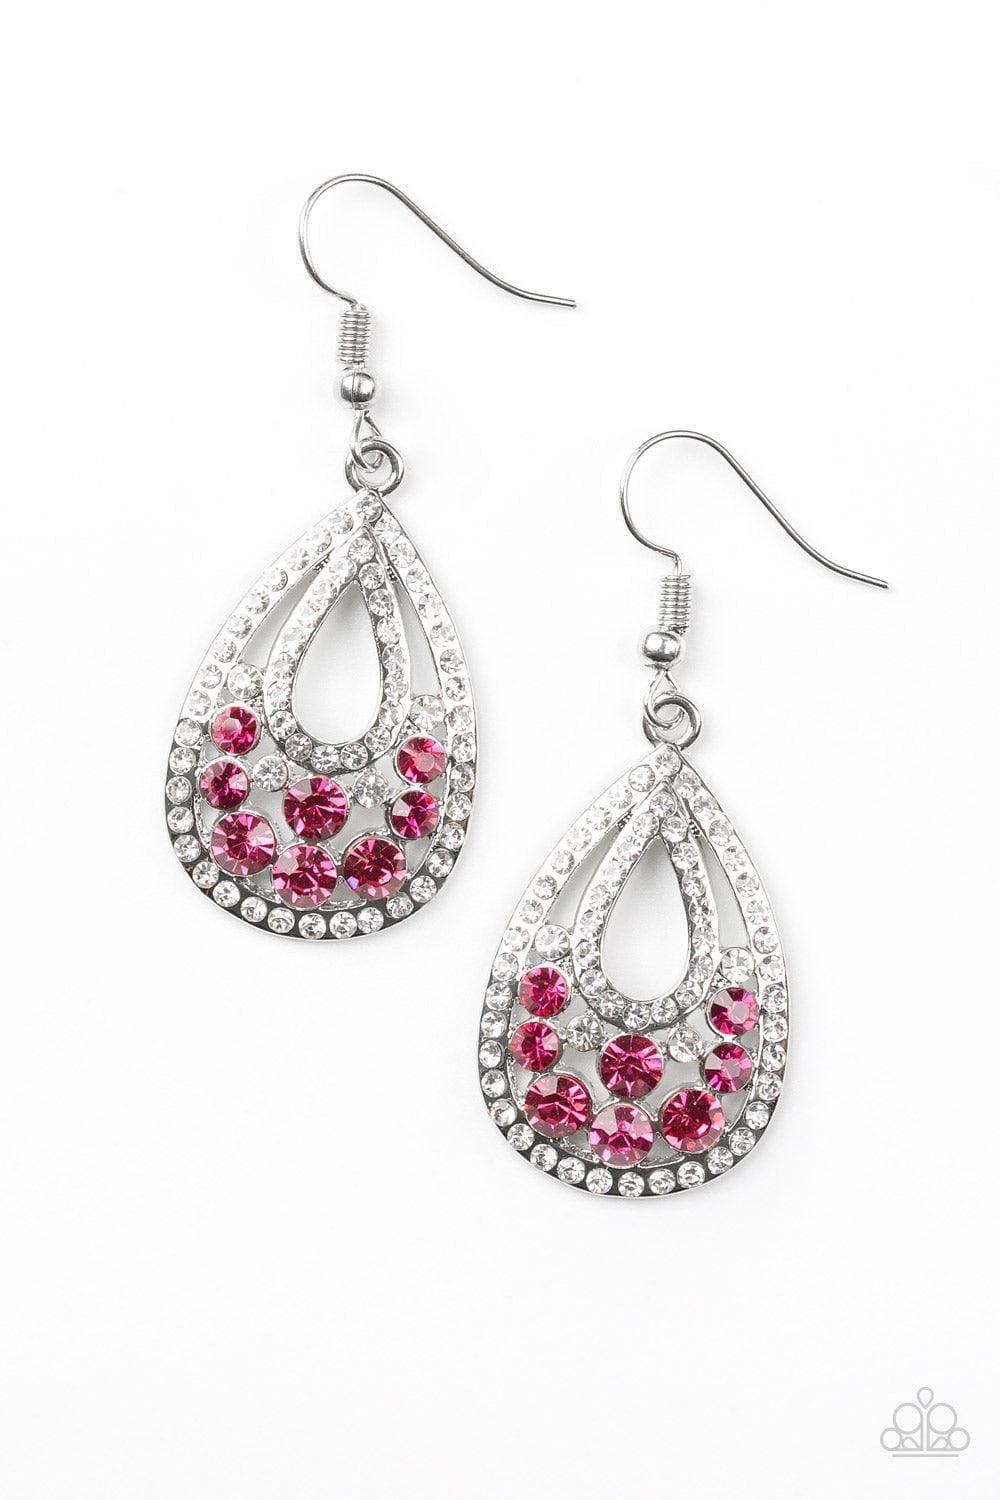 Paparazzi Accessories - Sparkling Stardom - Pink Earrings - Bling by JessieK